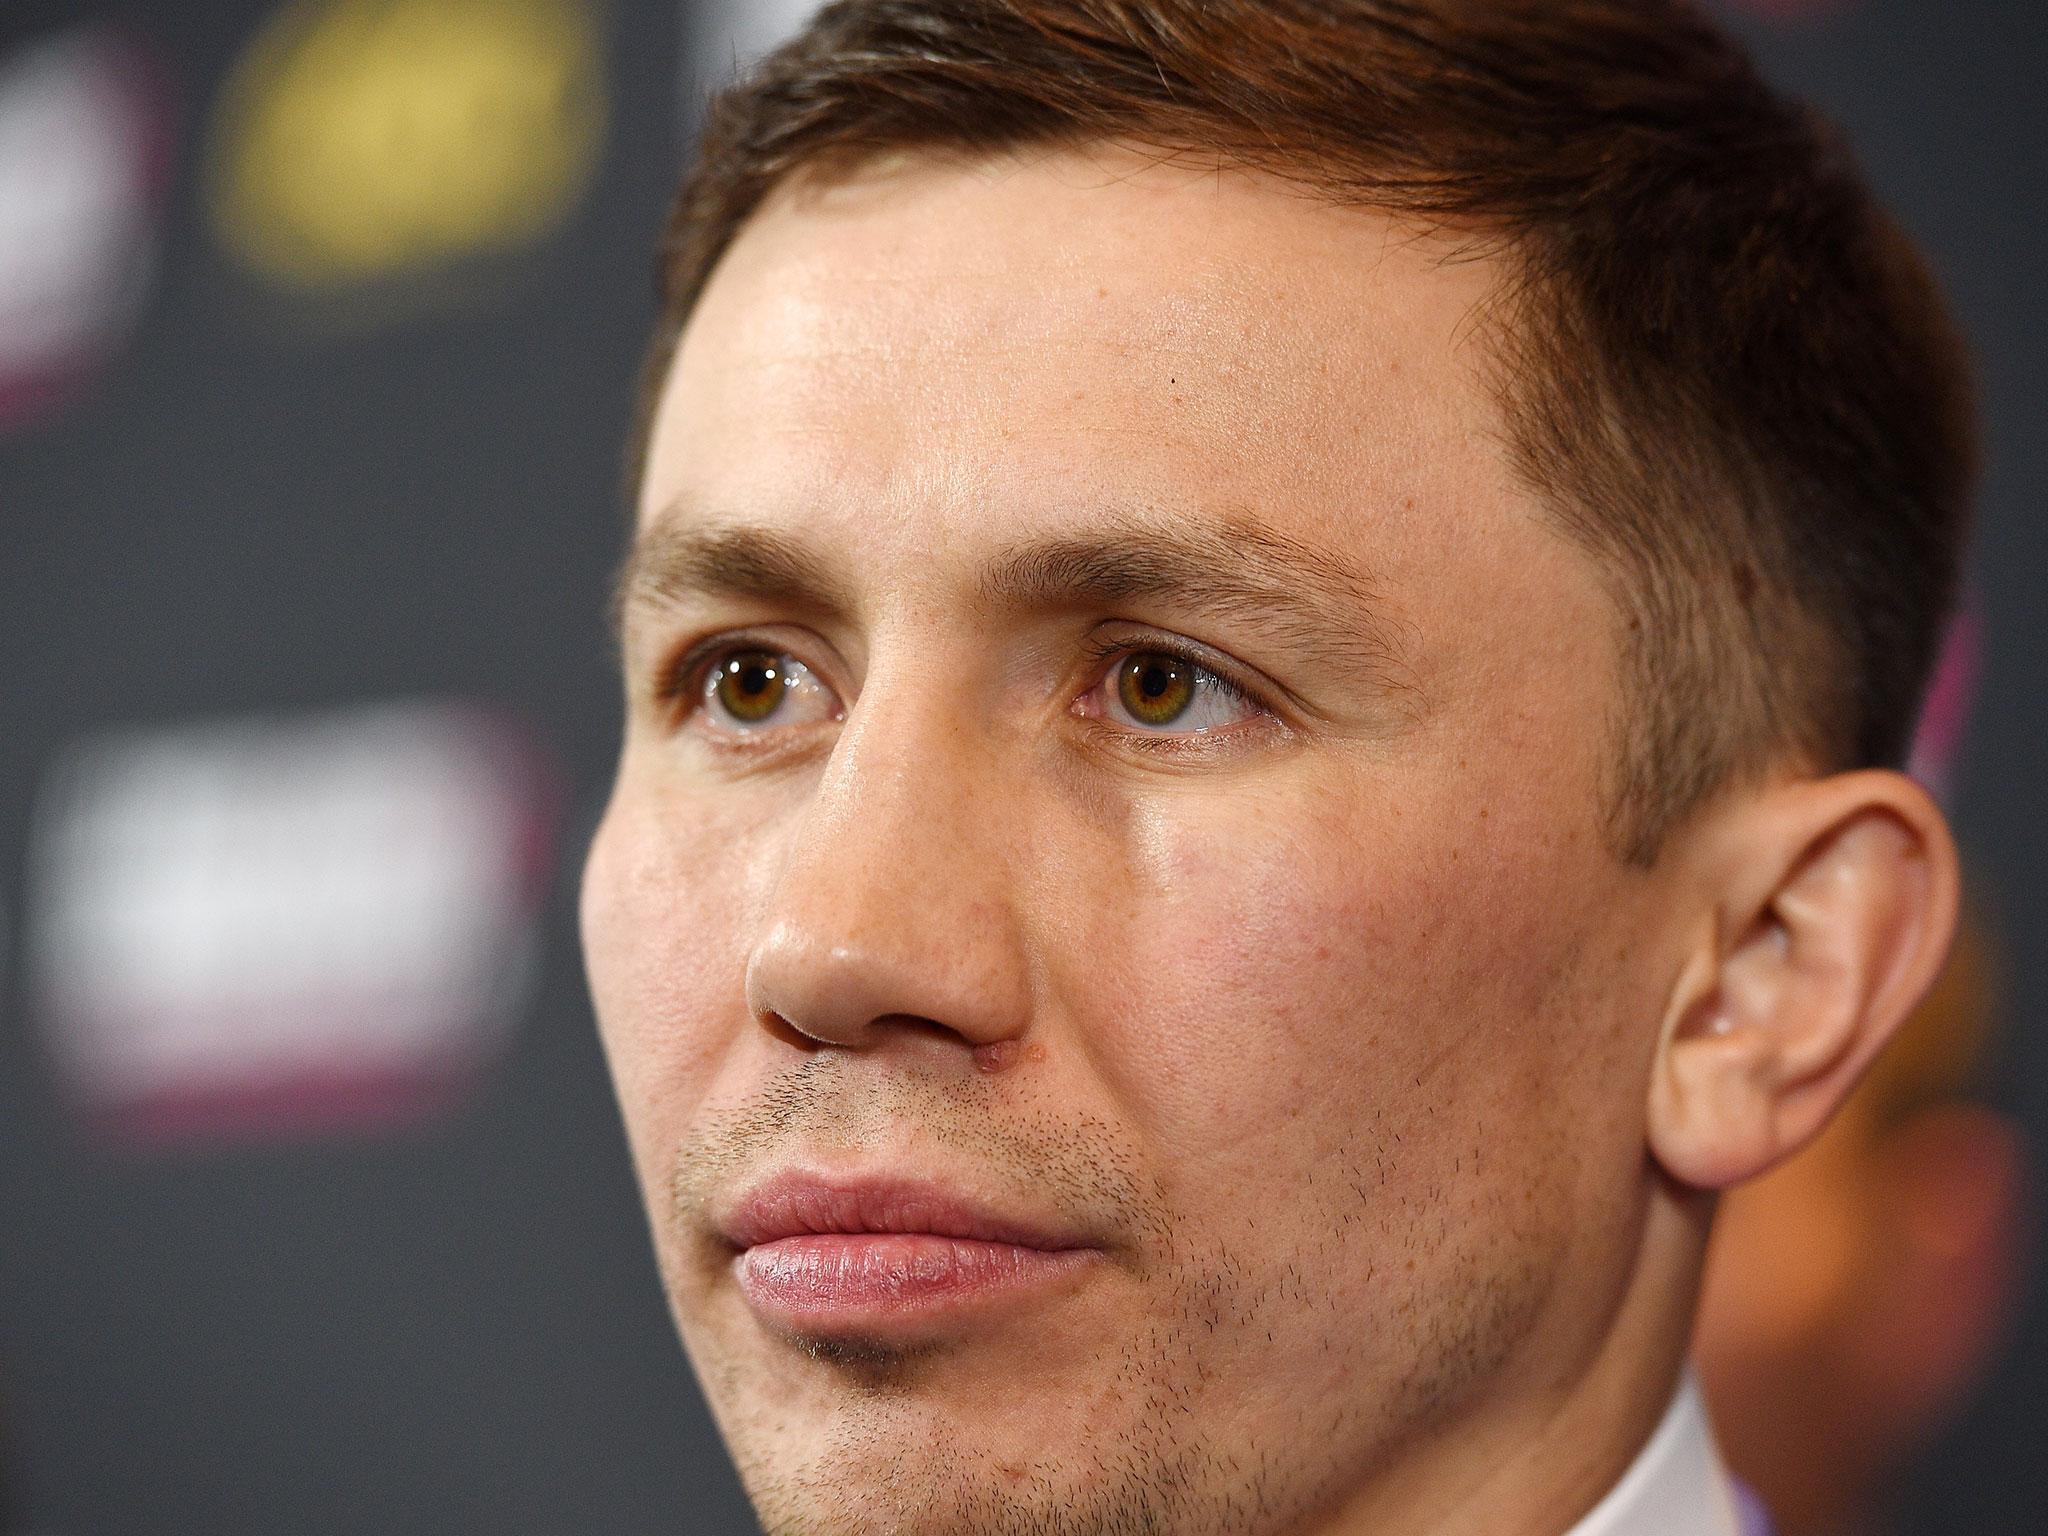 Gennady Golovkin still wants his rematch with Canelo Alvarez to go ahead though